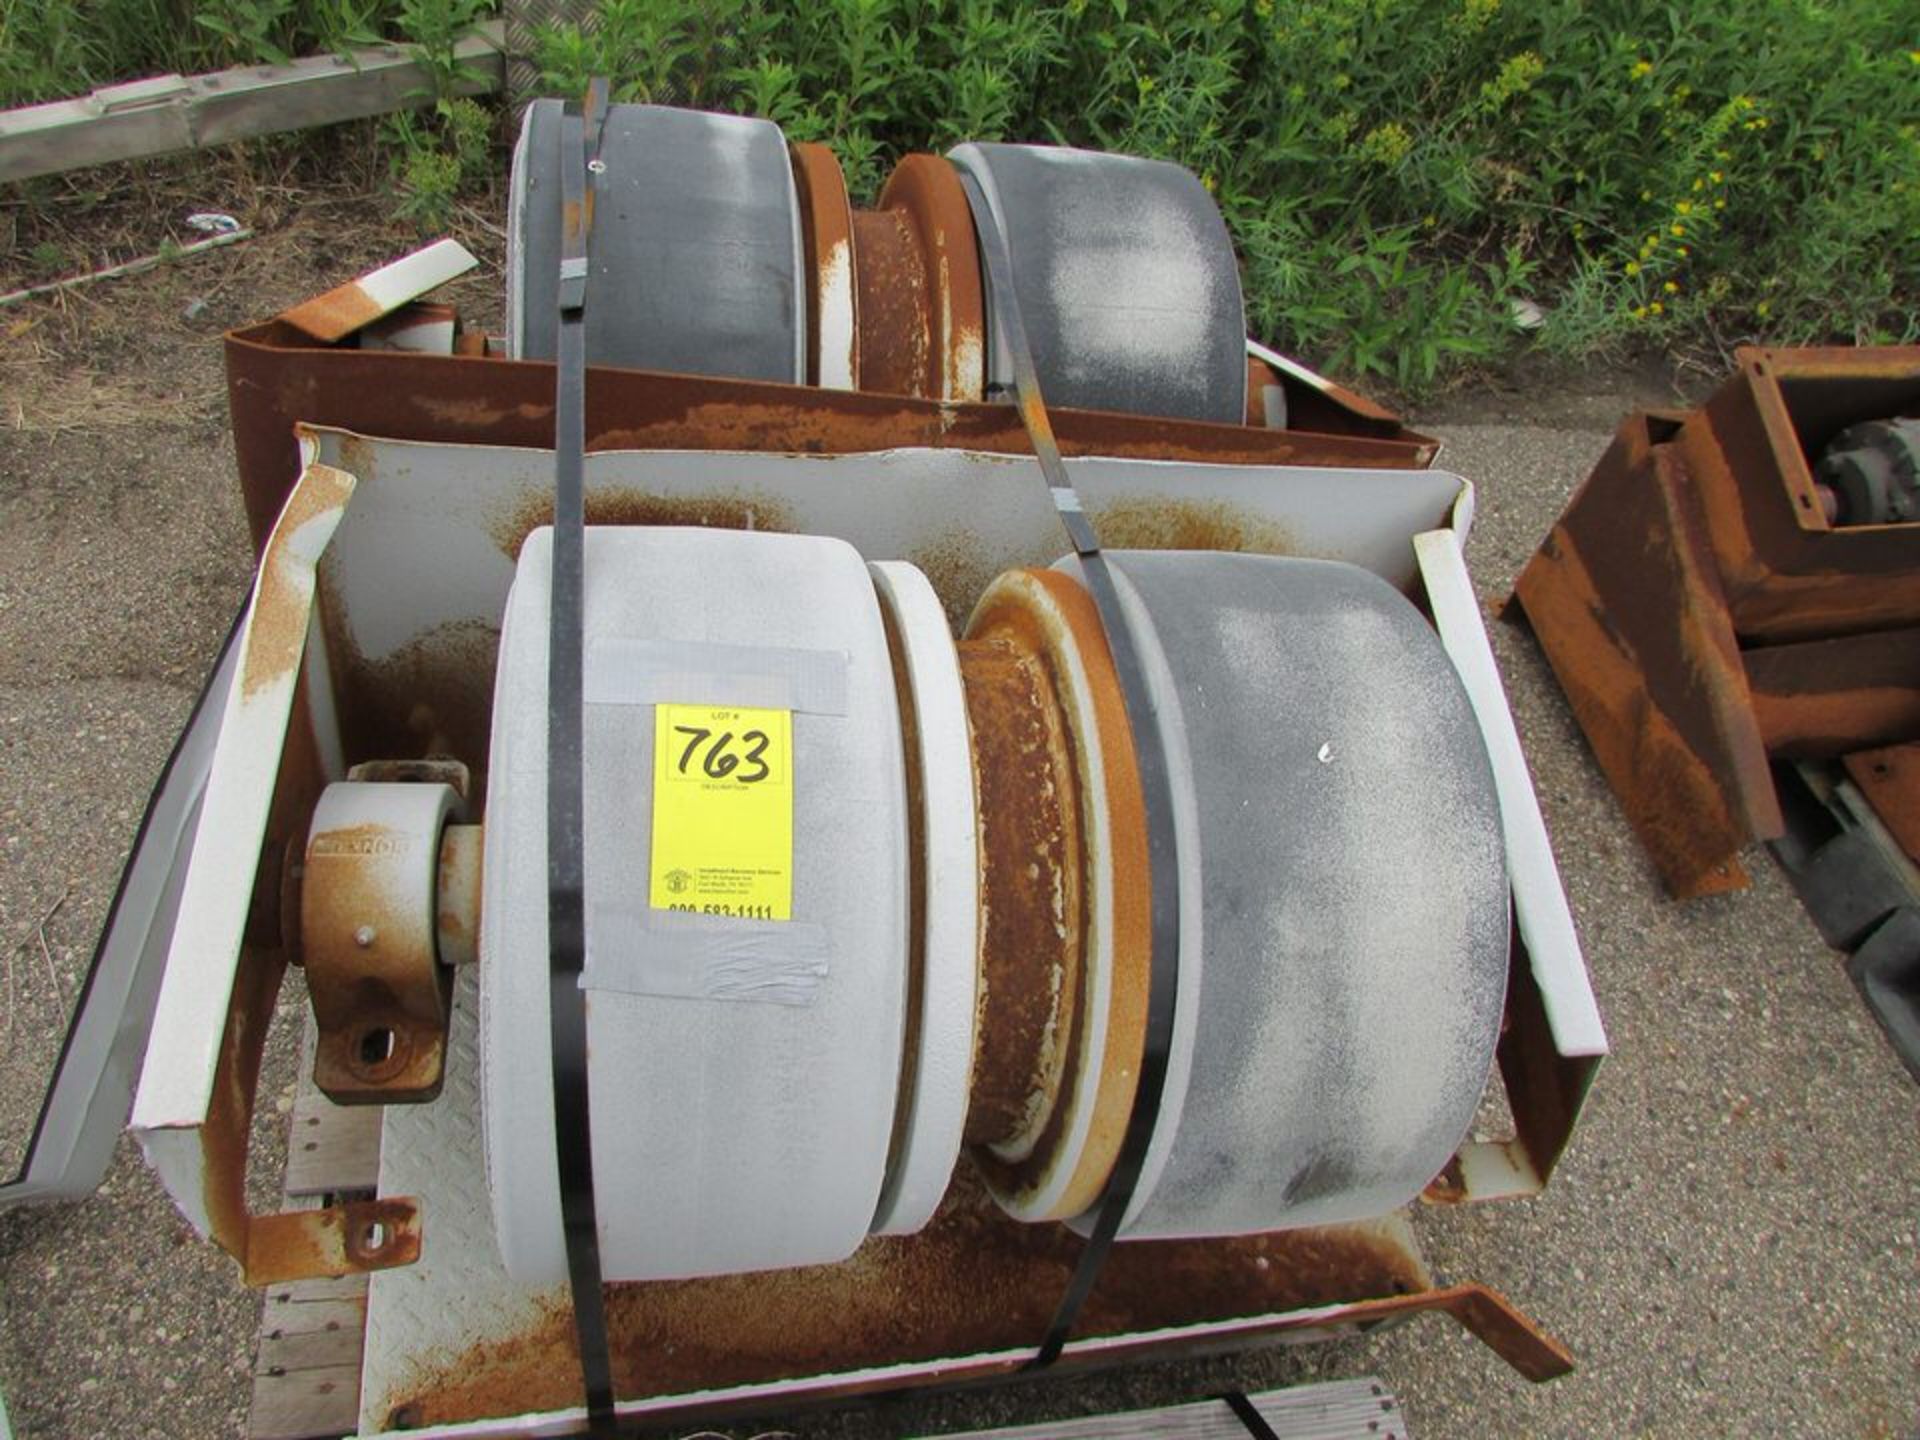 Spare Set of (2) 40-Ton Welding Positioner Idler Rollers. Loc. 420 Main Ave E, West Fargo, ND 58079 - Image 2 of 3